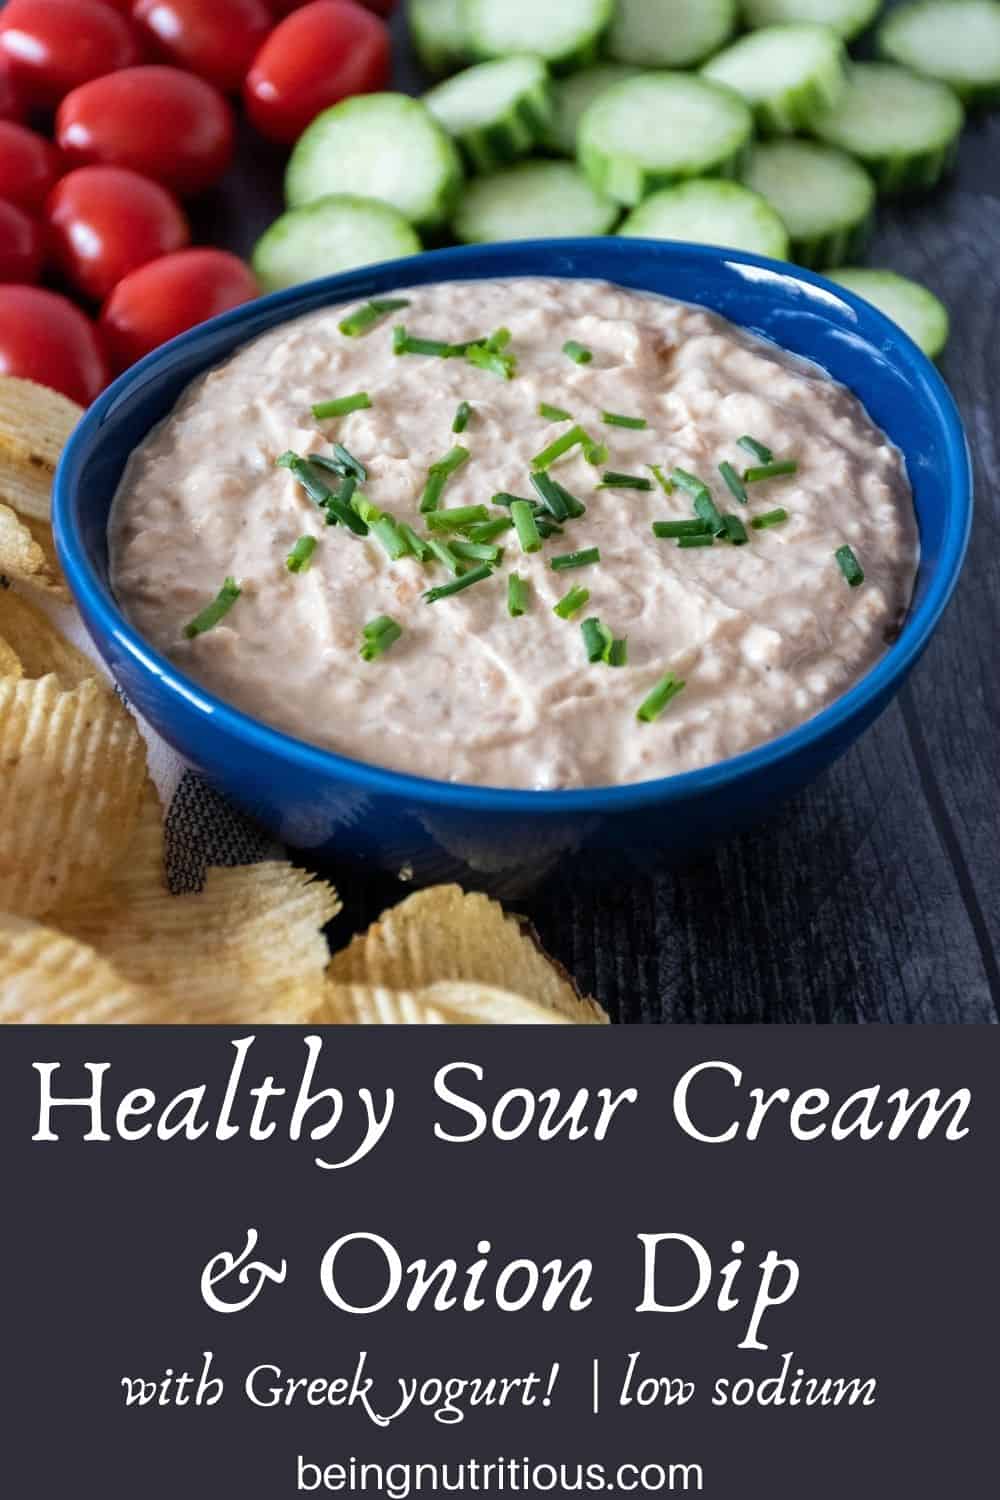 Bowl of dip, surrounded by chips, baby tomatoes, and cucumber slices. Text overlay: Healthy Sour Cream and Onion Dip, with Greek yogurt, low sodium.